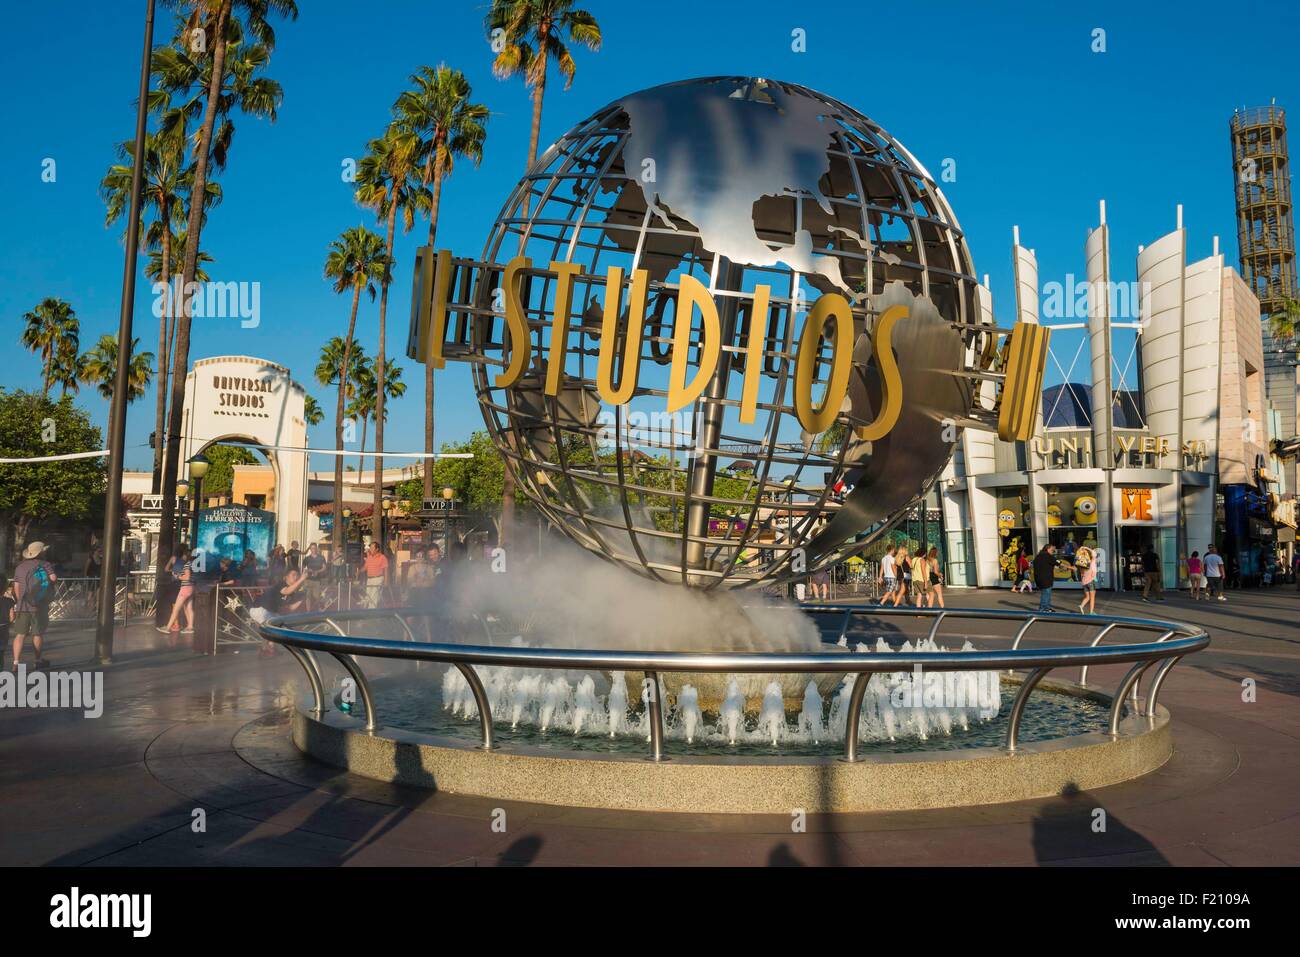 United States, California, Los Angeles, Hollywood, Universal Studios Banque D'Images